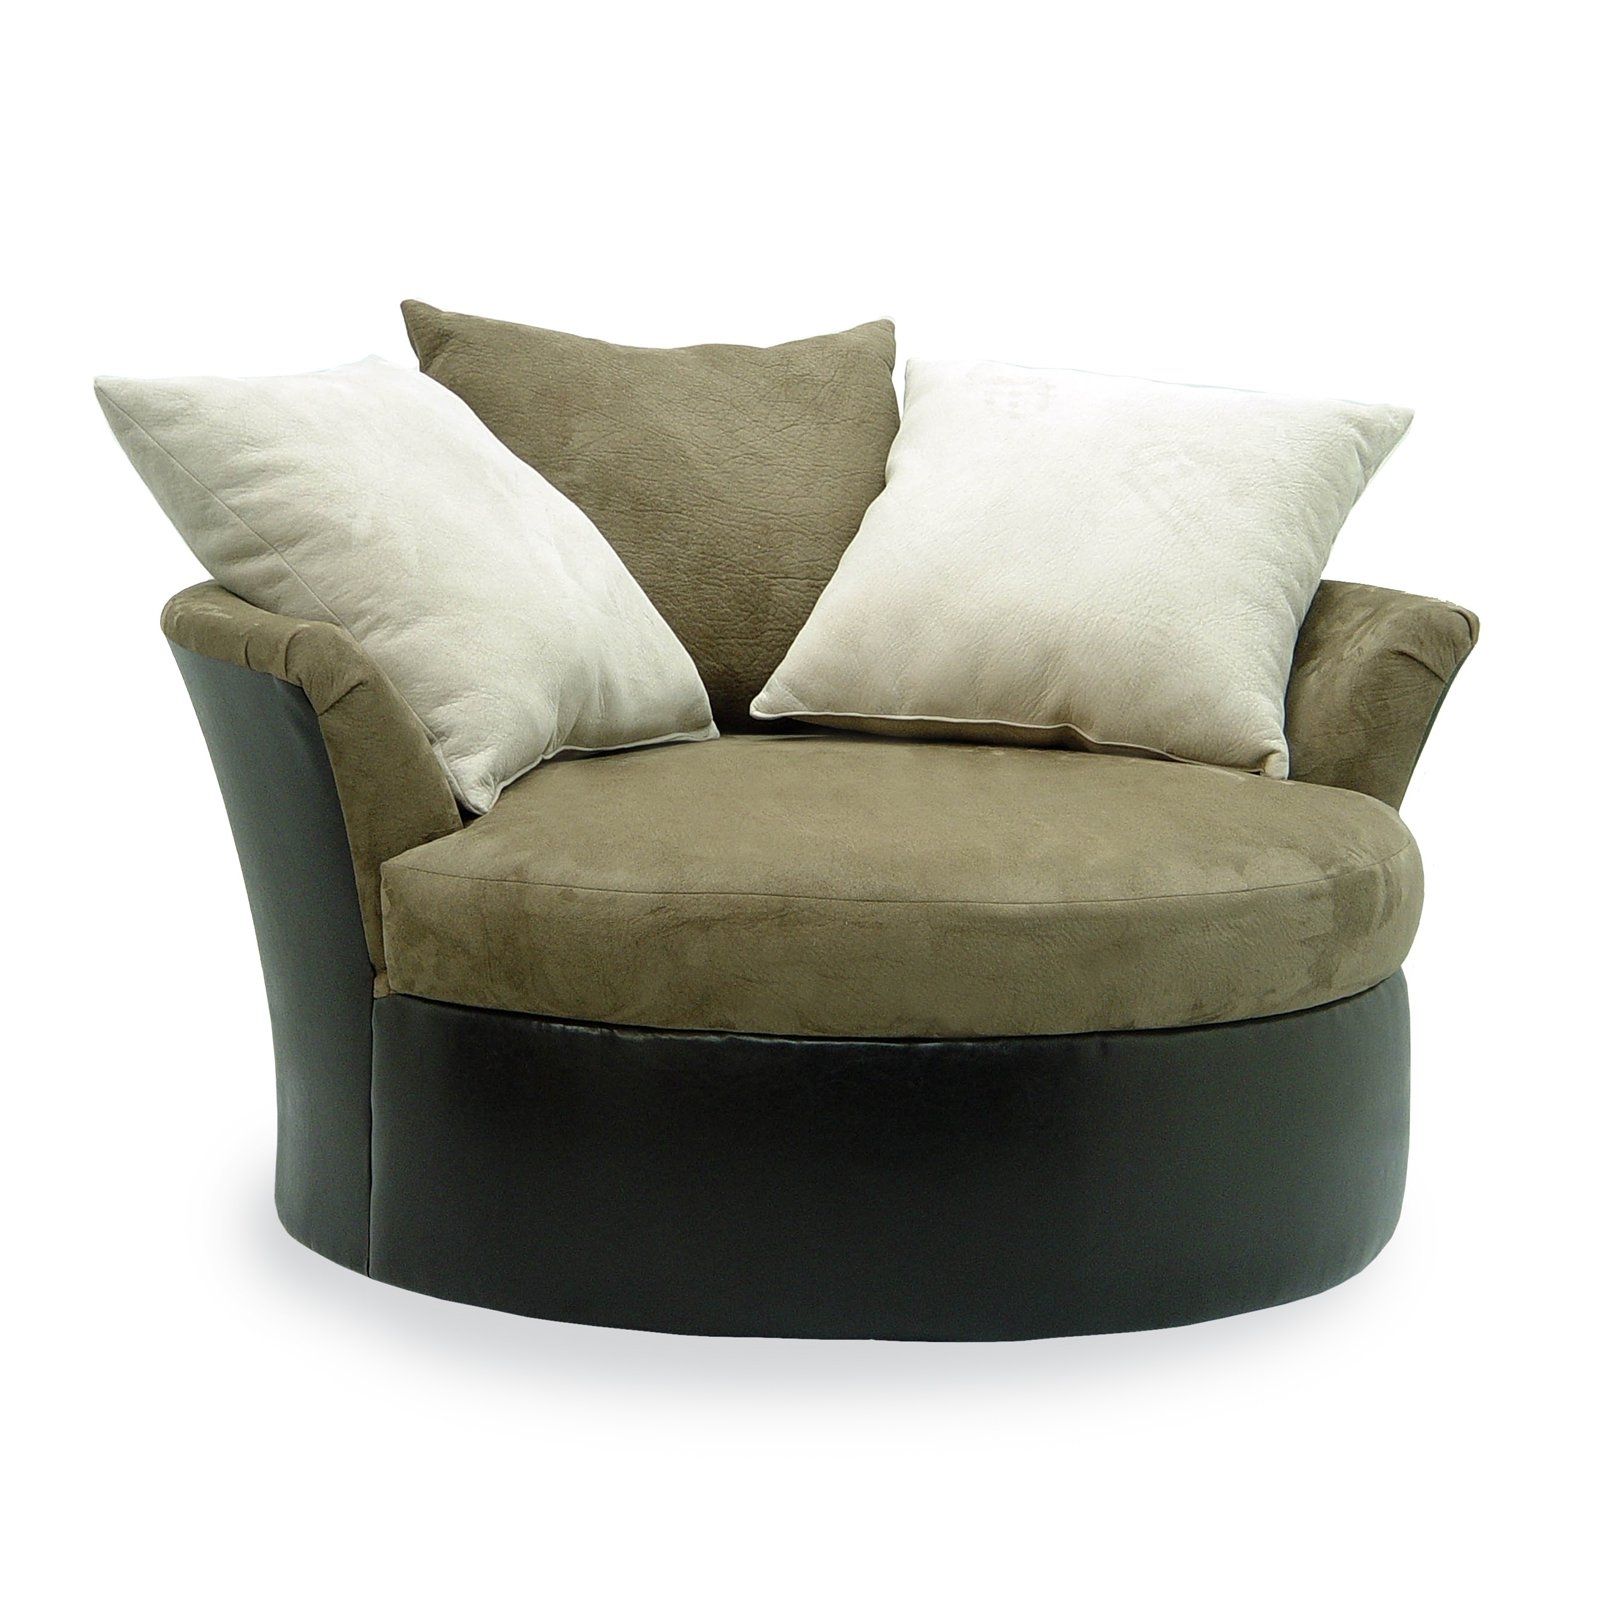 Round Chaise Lounges Pertaining To Trendy Outstanding Round Chaise Lounge Designs – Decofurnish (Photo 1 of 15)